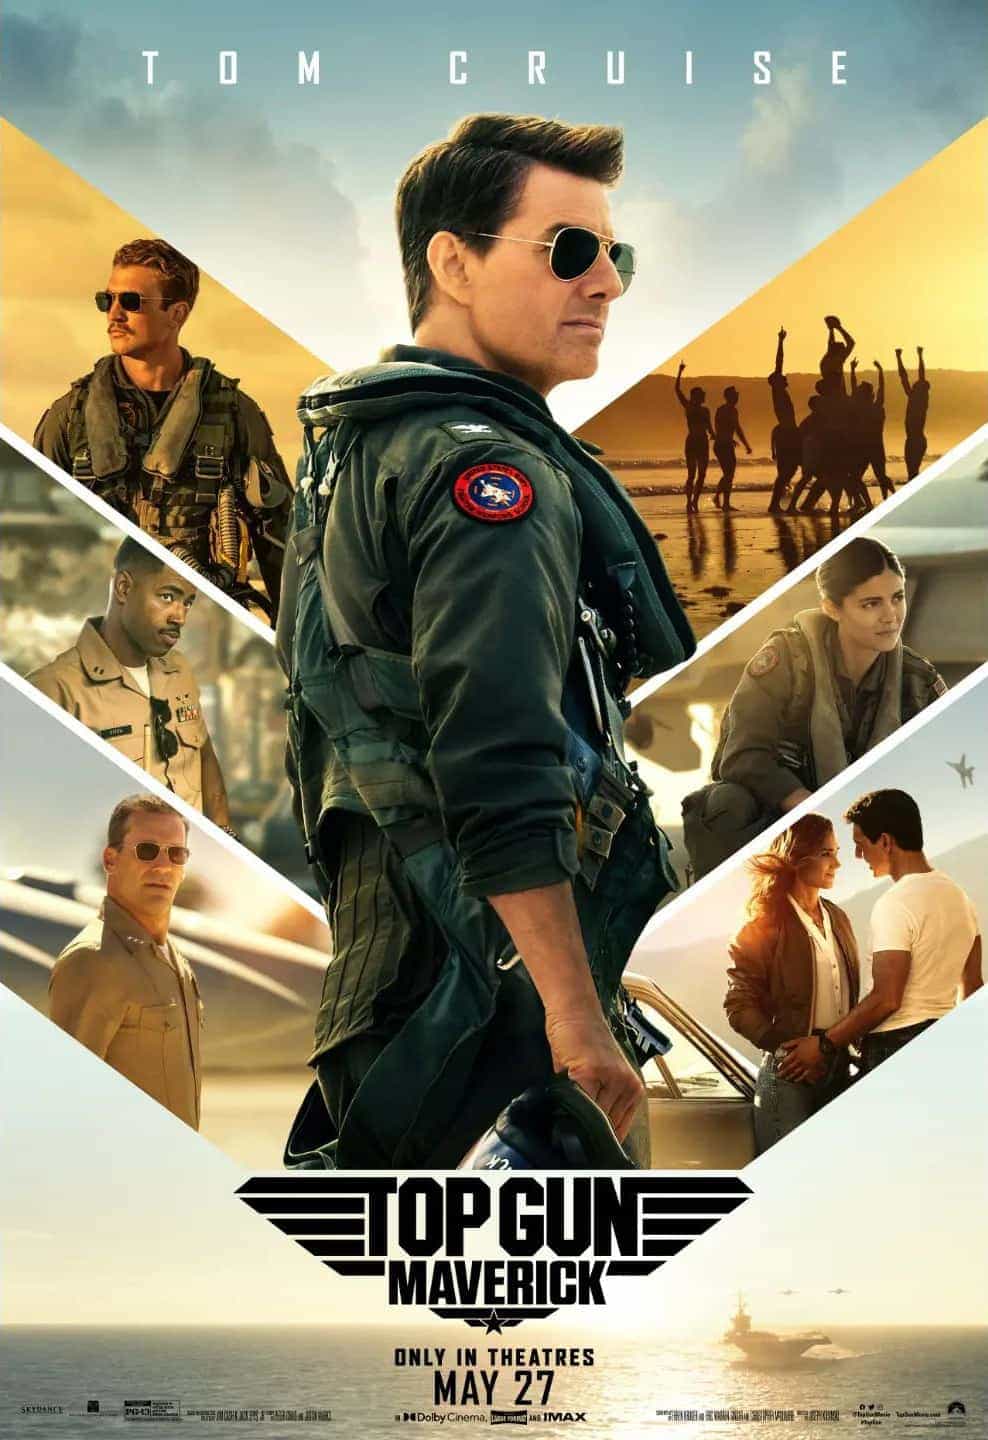 Second trailer for Top Gun Maverick is released, and it more of Tom Cruise flying a large plane!